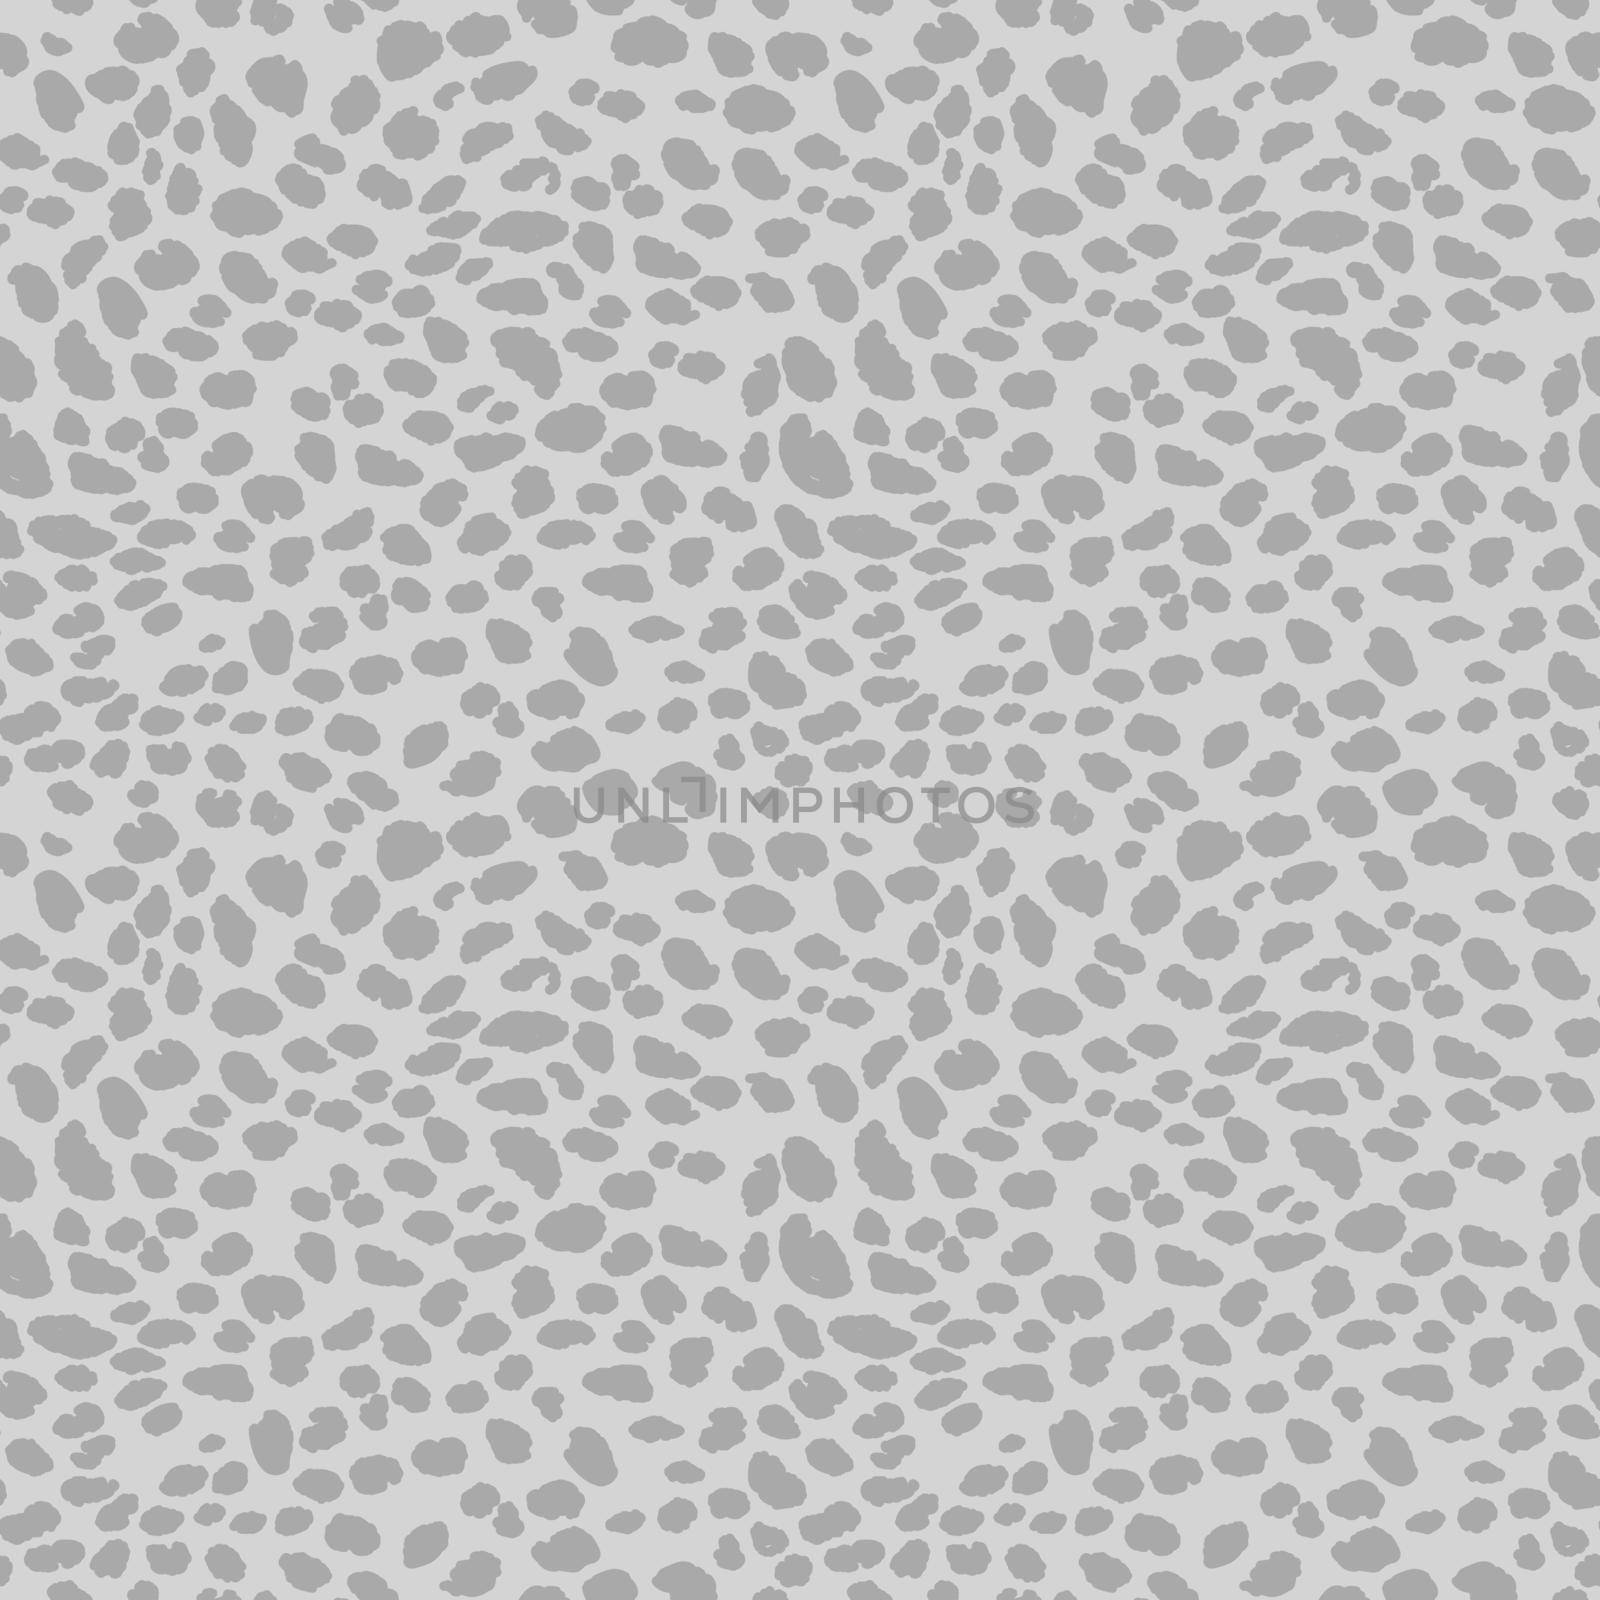 Abstract modern leopard seamless pattern. Animals trendy background. Grey decorative vector stock illustration for print, card, postcard, fabric, textile. Modern ornament of stylized skin by allaku